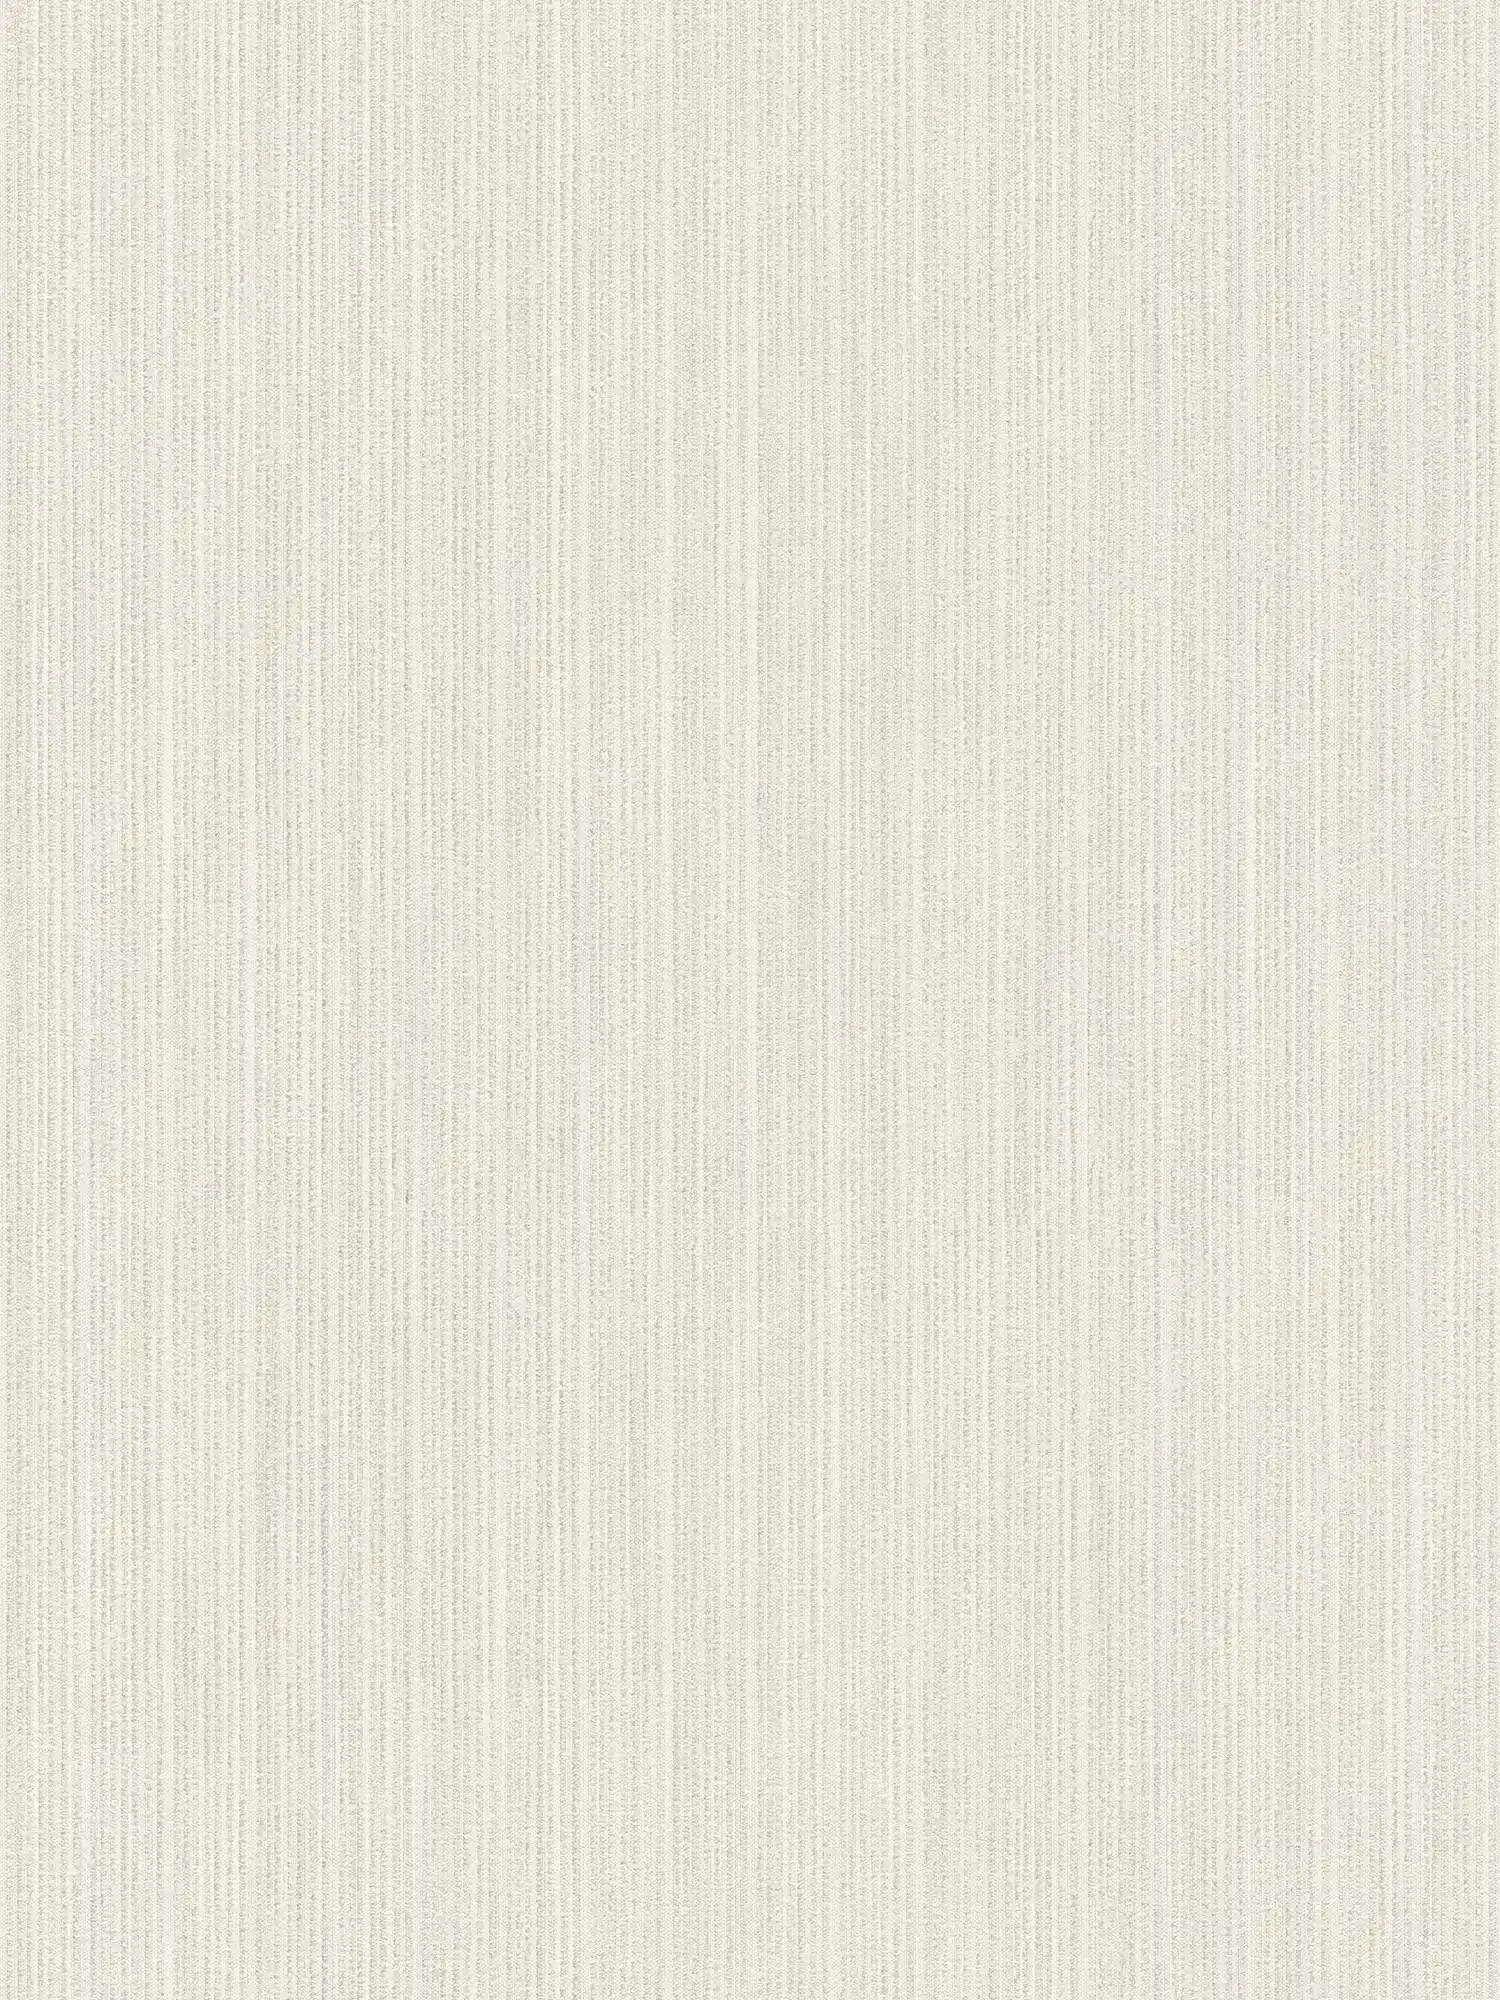 Plain wallpaper with lined structure pattern - beige
